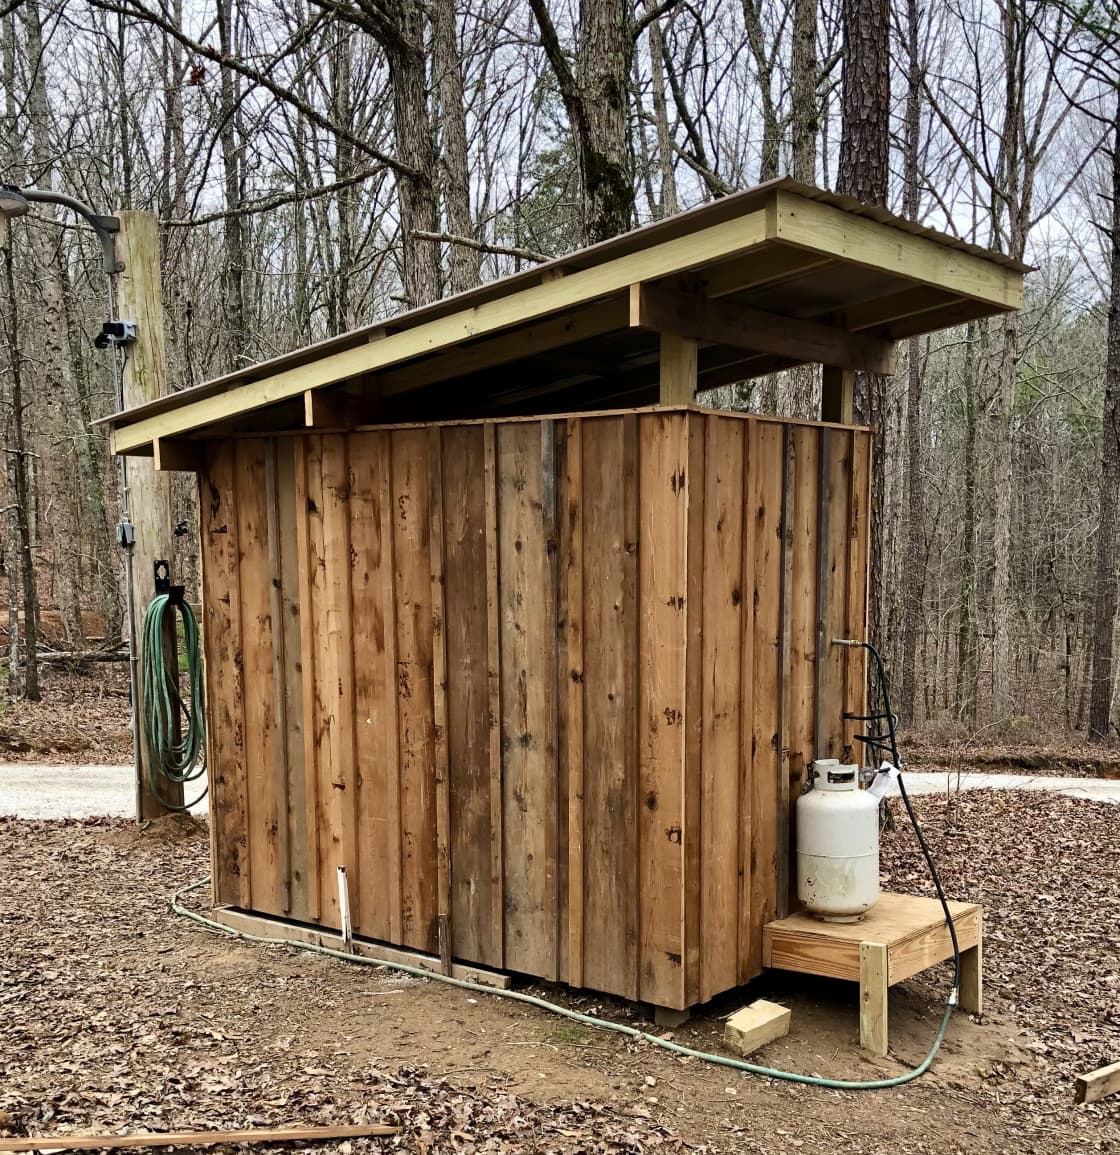 Our on-demand camp shower with hot water.